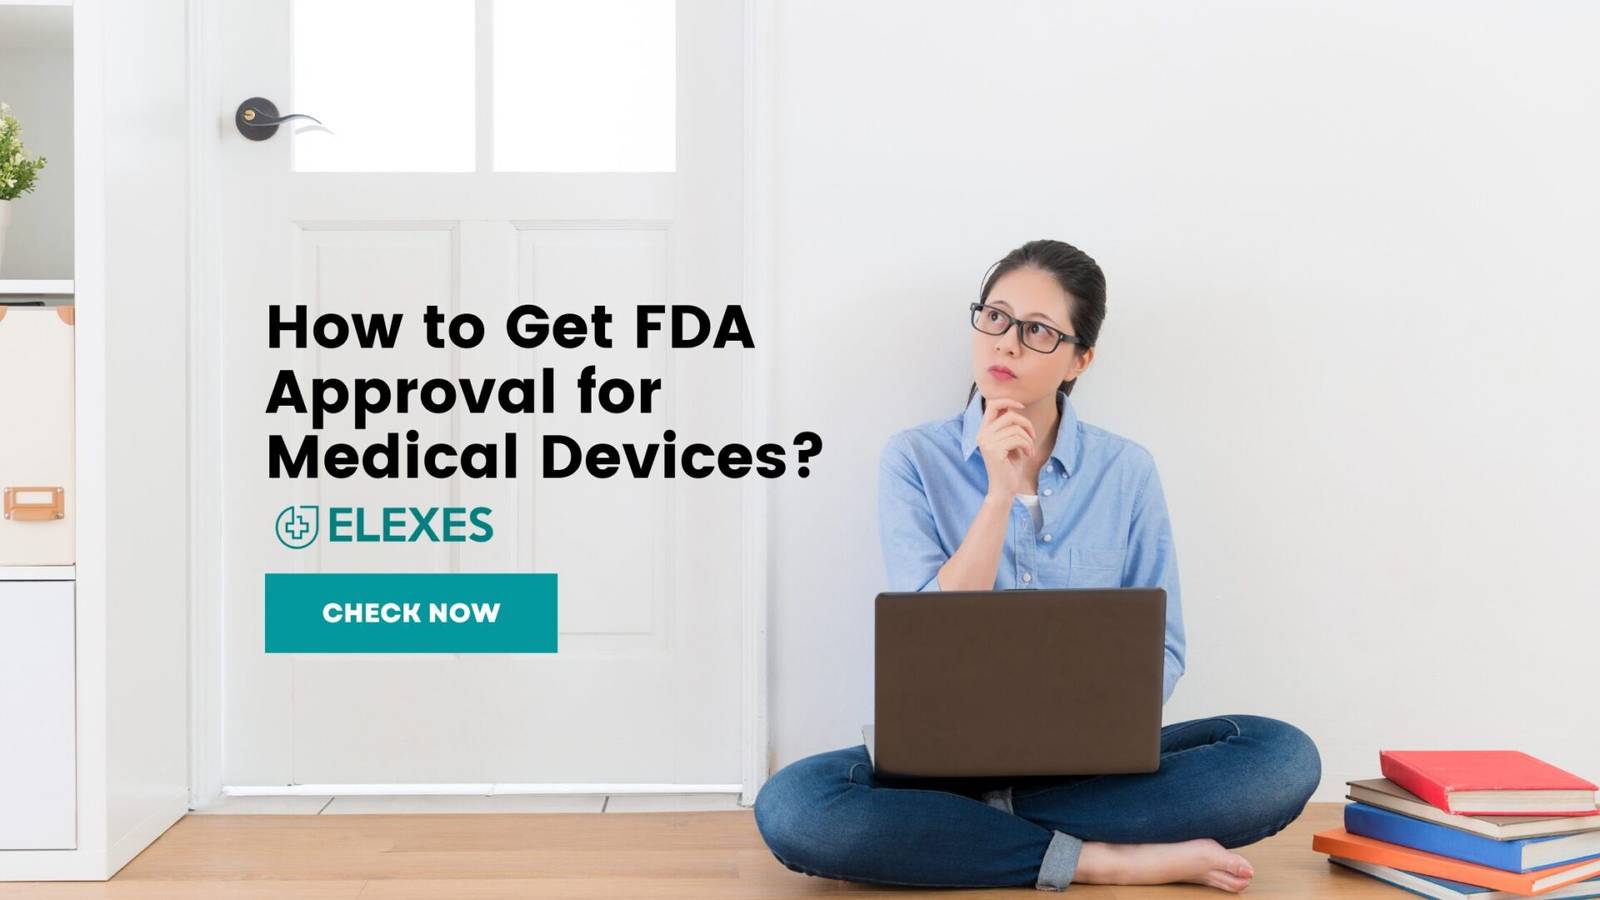 How to Get FDA Approval for Medical Devices?